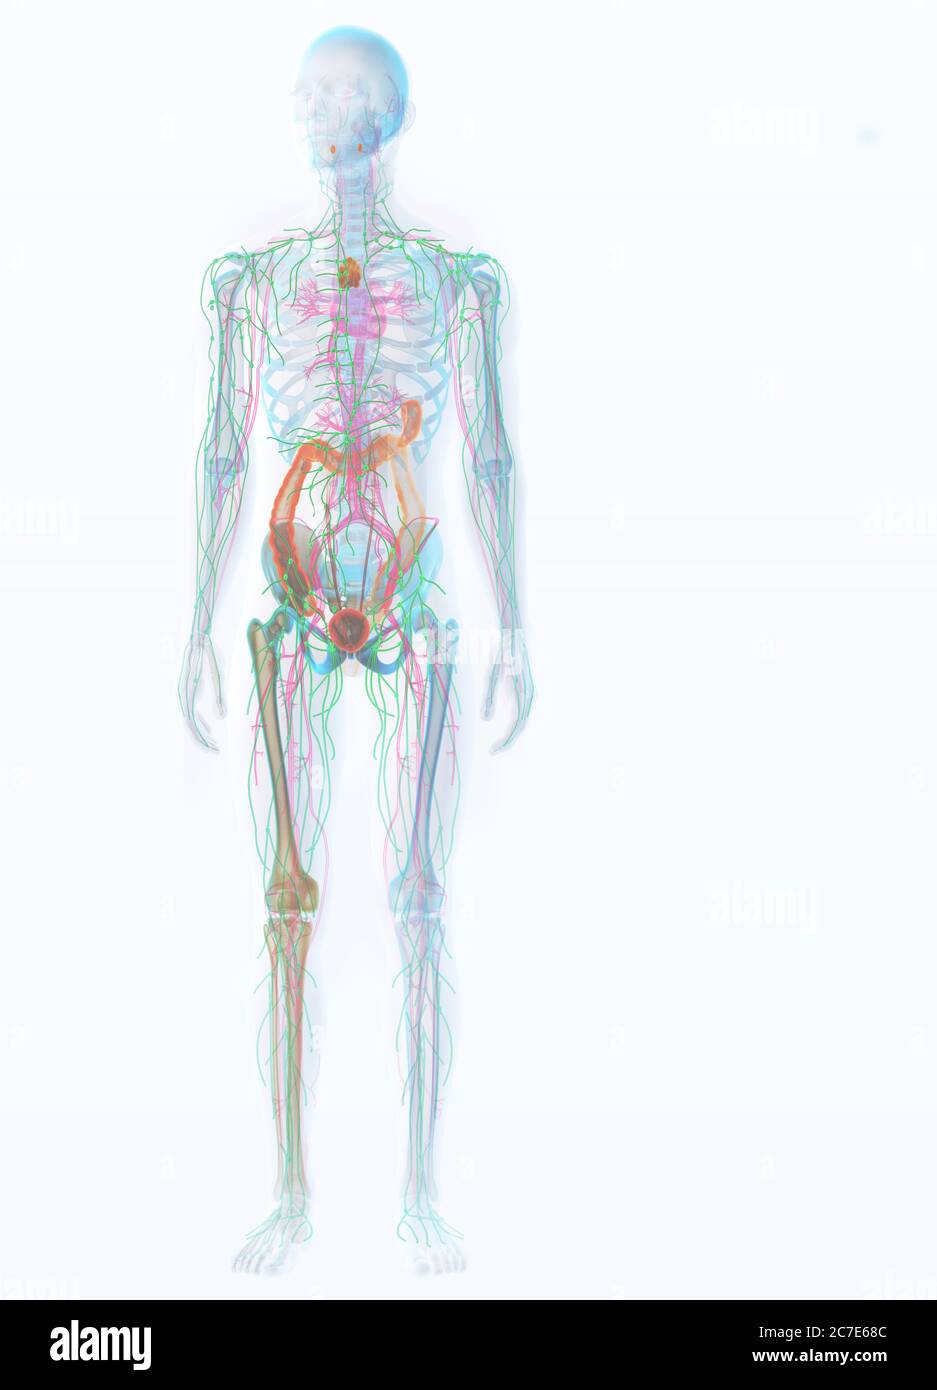 3D illustration showing human immune system of a man with adenoids, tonsils, axillary lymph nodes, bone marrow, appendix, intestine, bladder and splee Stock Photo